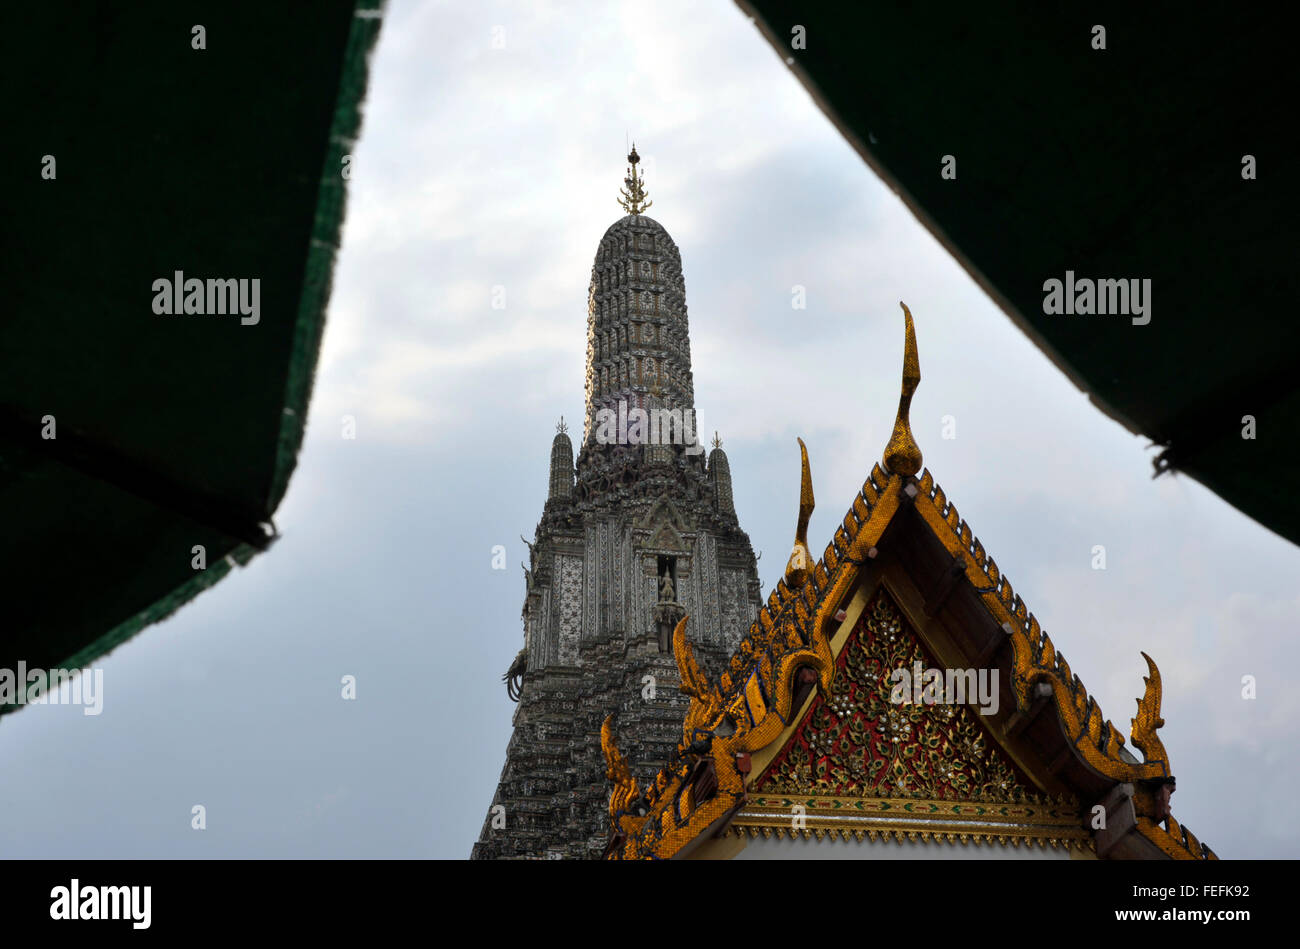 Wat Arun the Temple of the Dawn also known as Wat Chaeng, in Thonburi, Bangkok, Thailand. Stock Photo